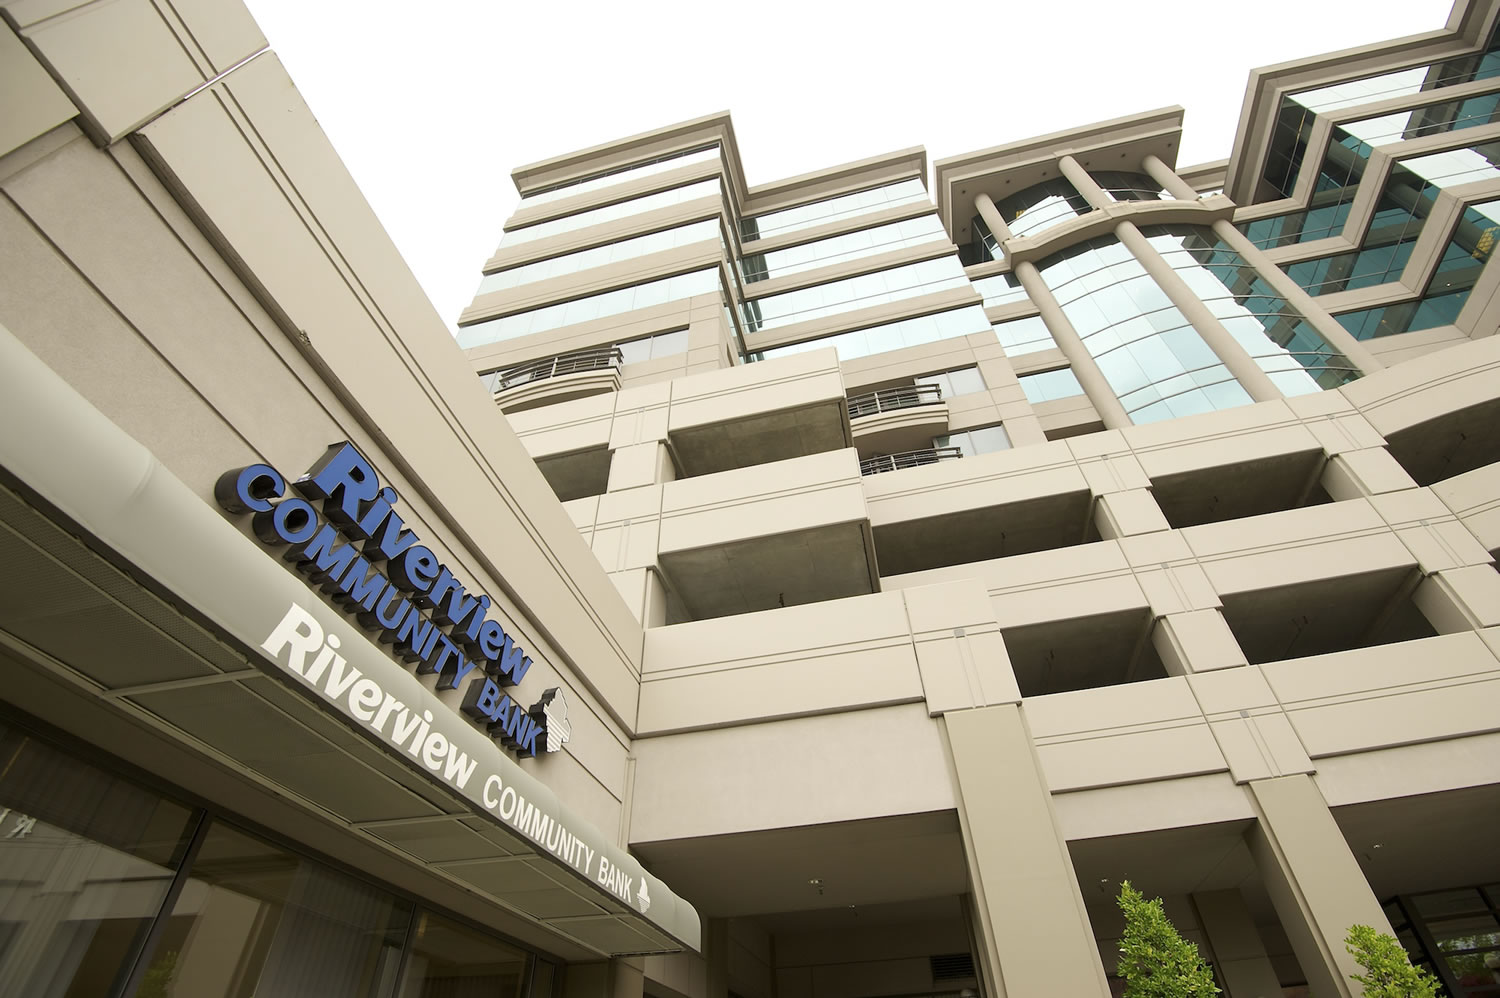 Riverview Bancorp, Inc., Vancouver-based Riveview Bancorp, parent to Riverview Community Bank, on Wednesday reported a net loss of $1.8 million, or 8 cents per share, in its first fiscal quarter.